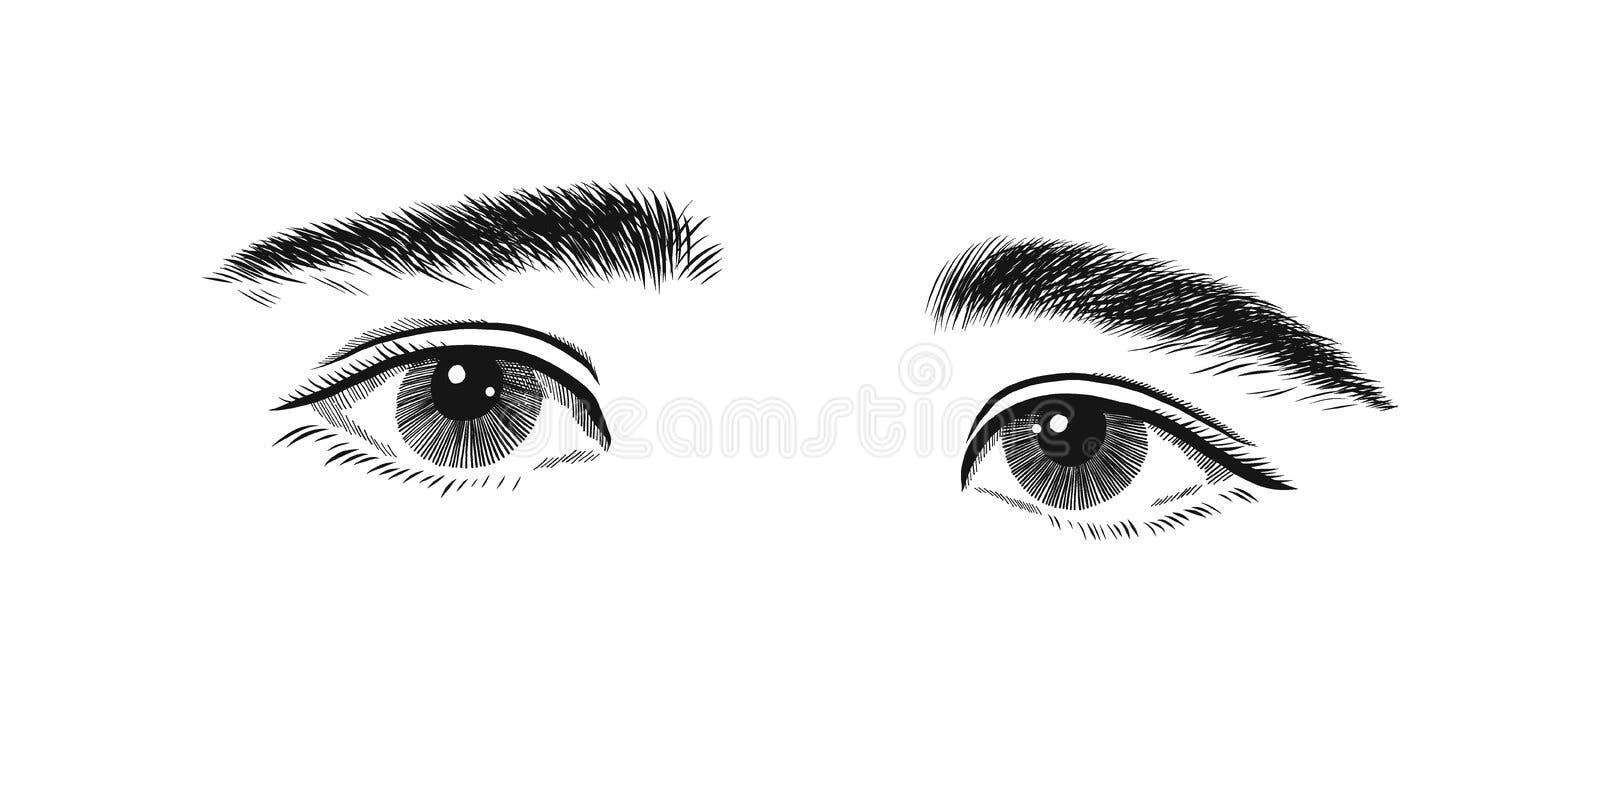 Kid with a Little Shy and Sad of Eye. Eyes Emotions, Sketch Vector ...